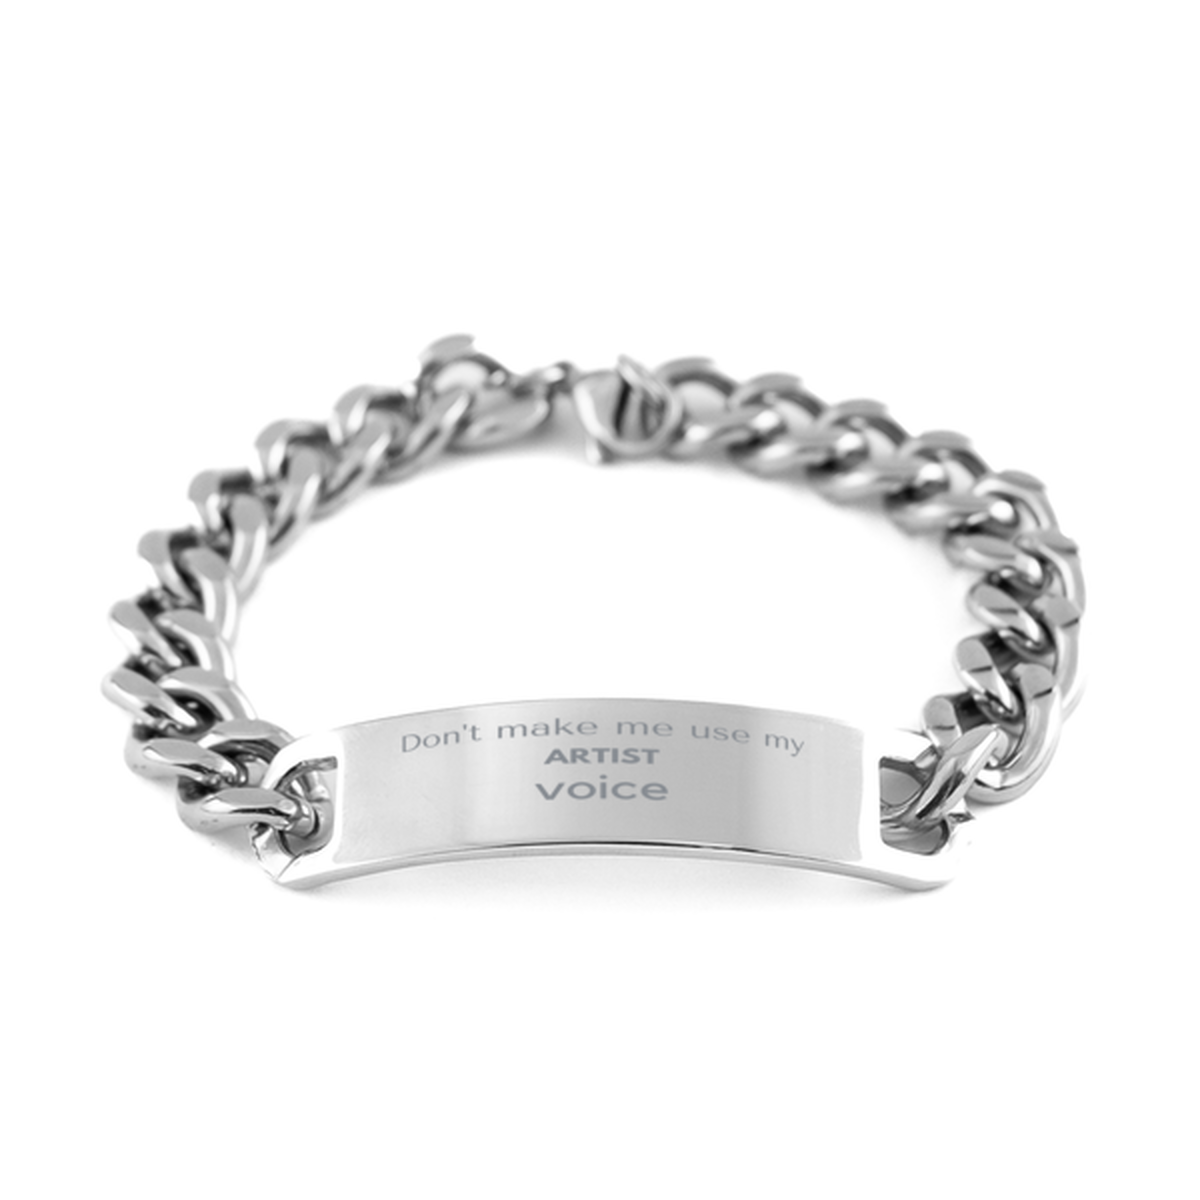 Don't make me use my Artist voice, Sarcasm Artist Gifts, Christmas Artist Cuban Chain Stainless Steel Bracelet Birthday Unique Gifts For Artist Coworkers, Men, Women, Colleague, Friends